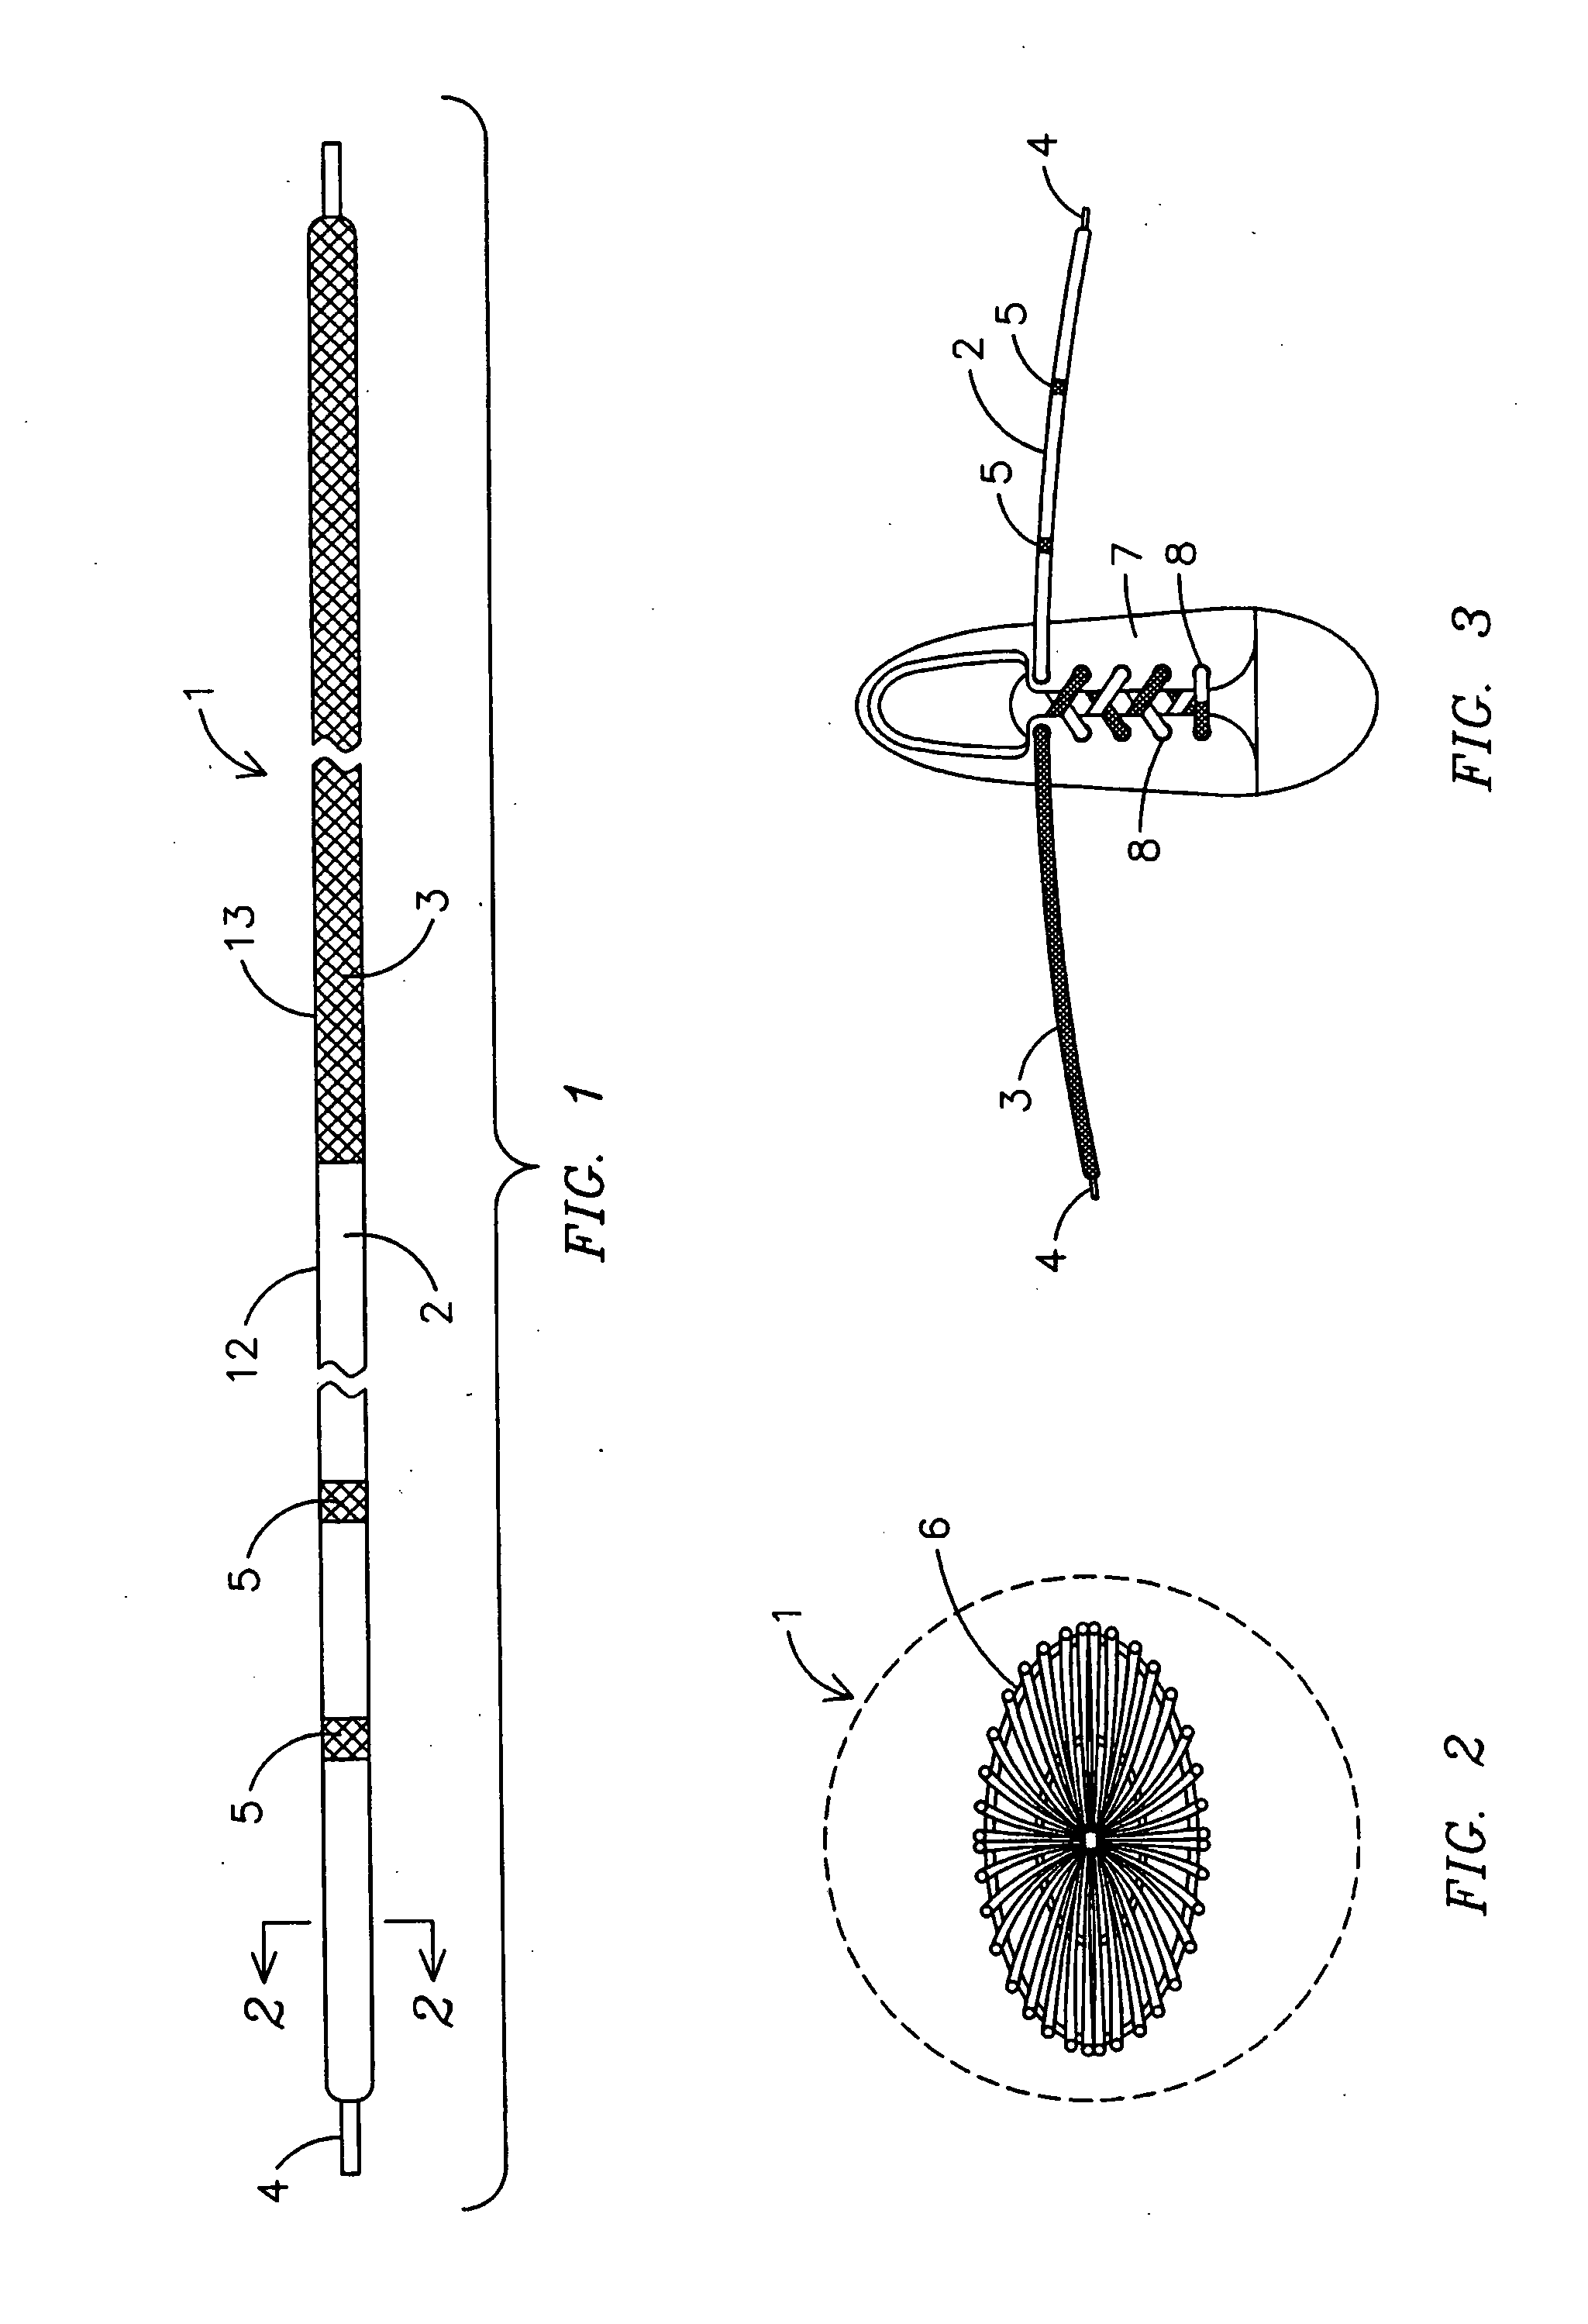 Instructional shoelaces system and method of use